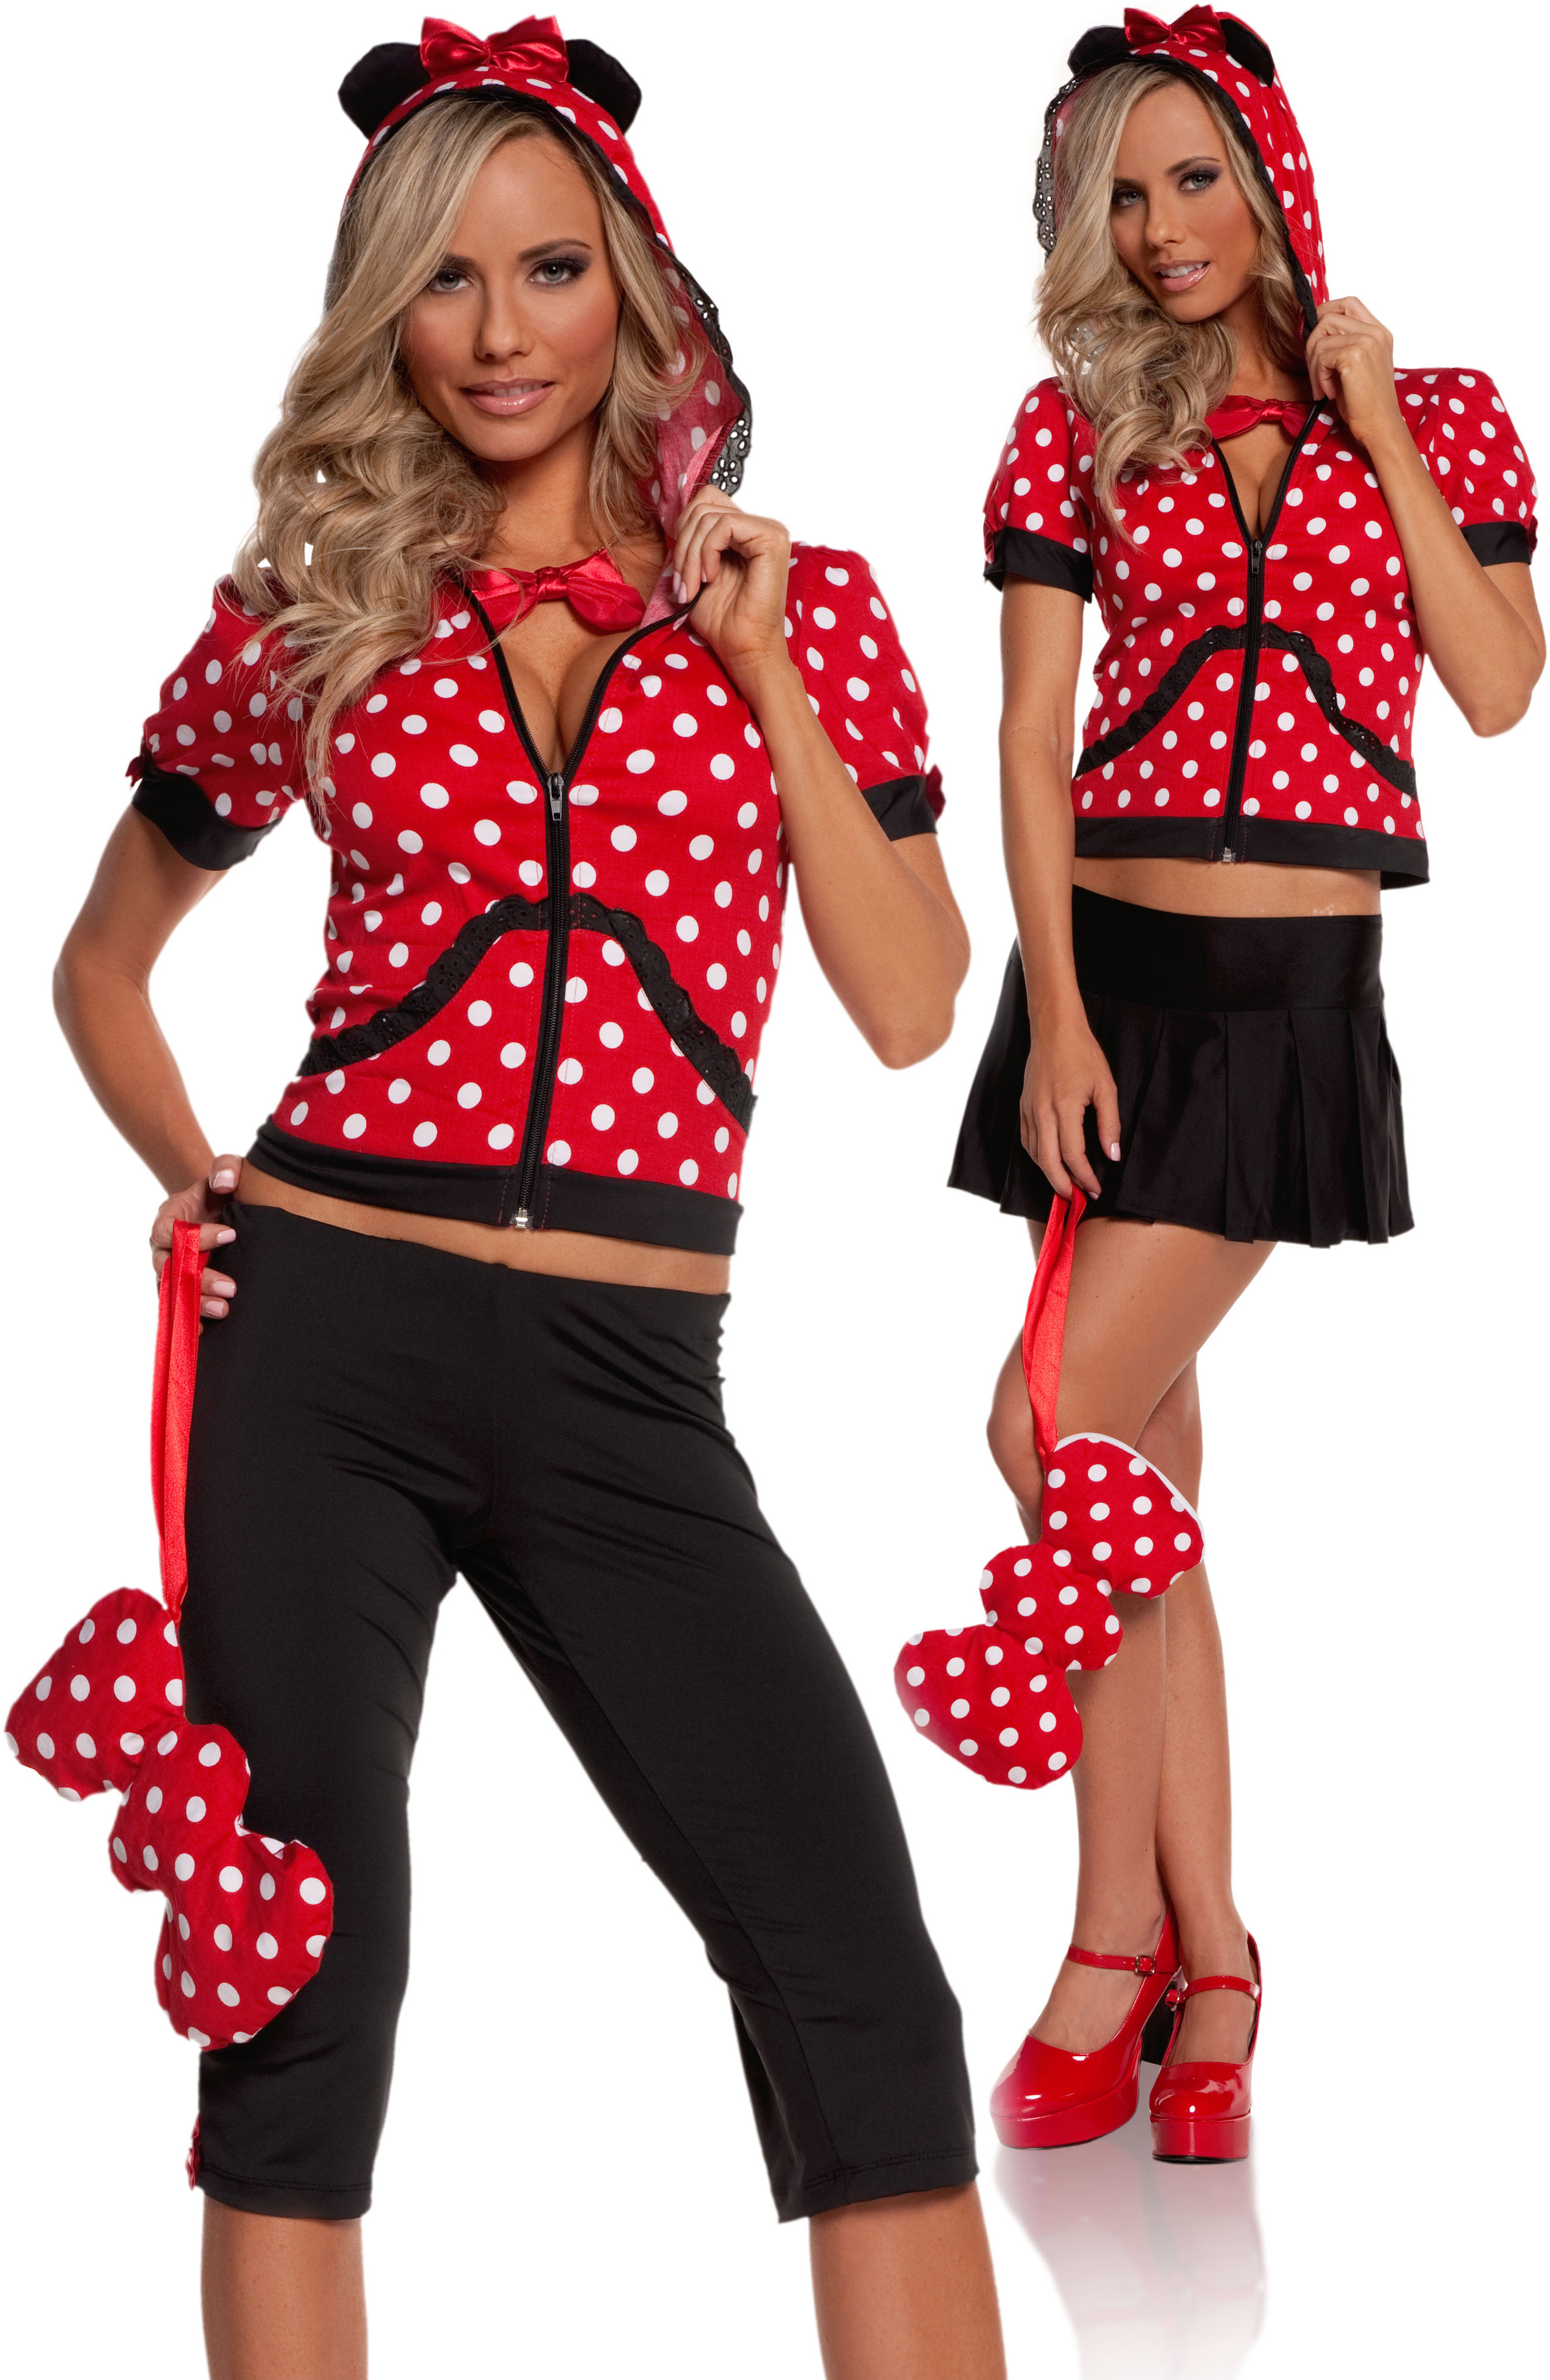 Elegant Moments Women's Miss Mouse Adult Costume - Red - Large